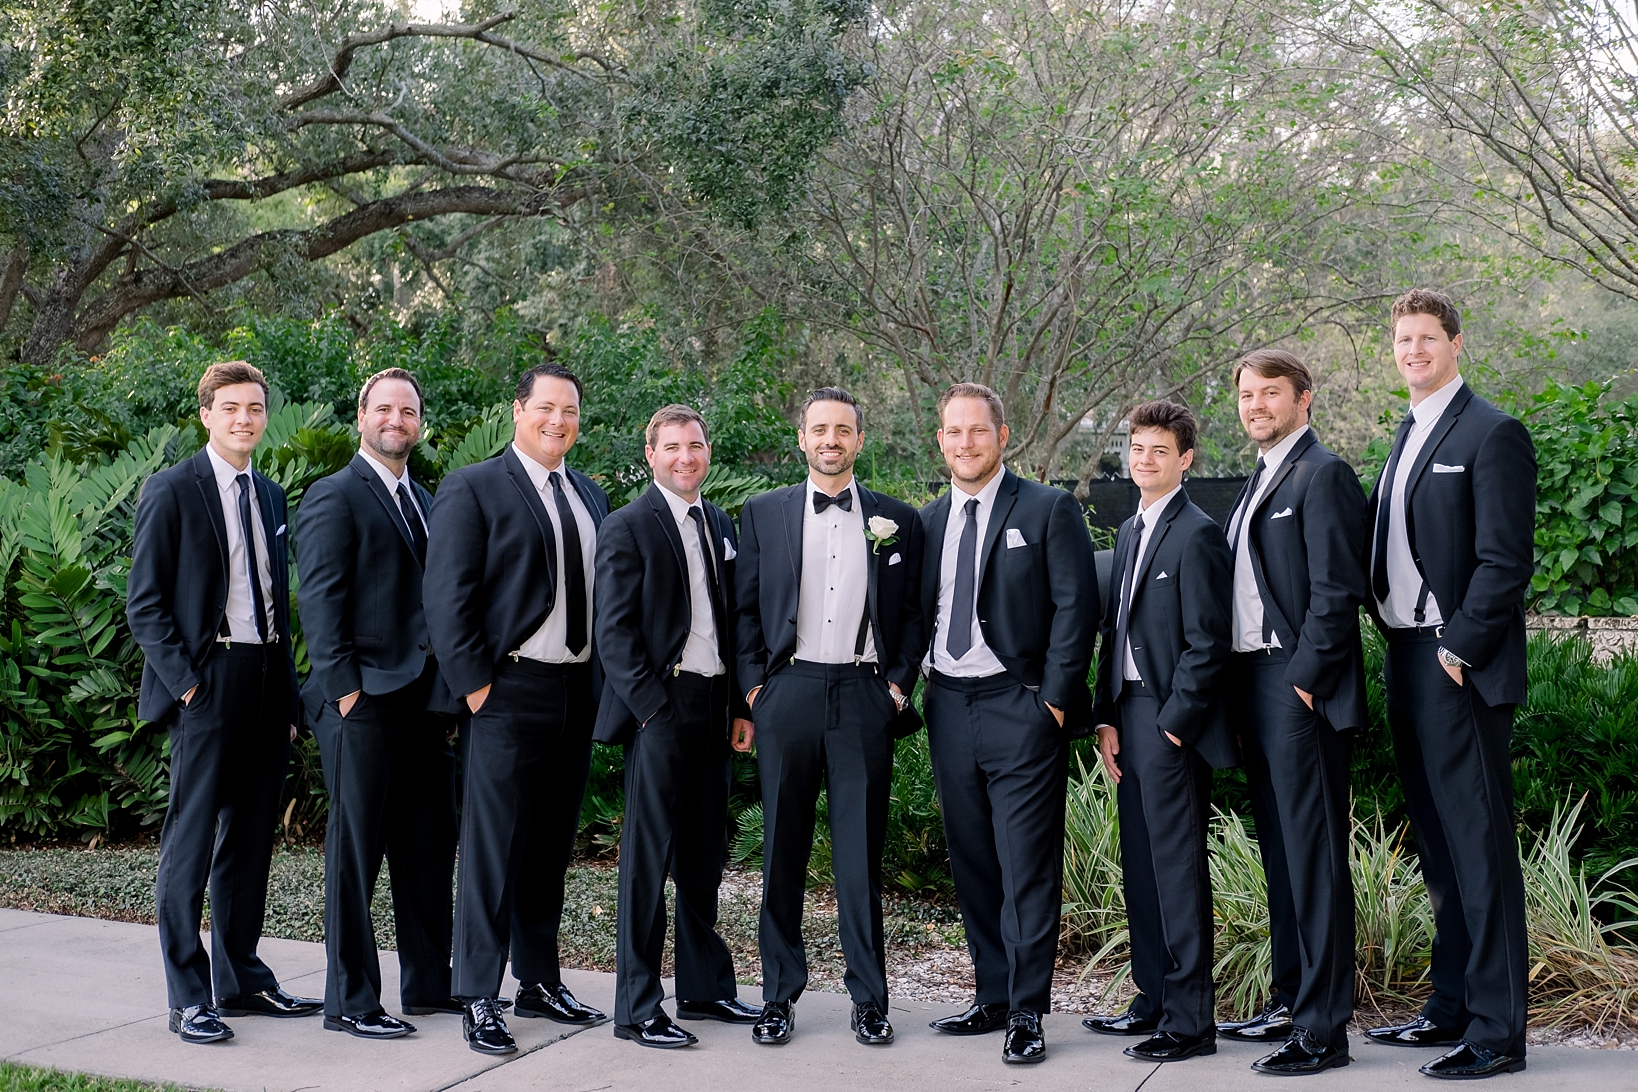 The Groom and his Groomsmen in classic black and white tuxedos by Sarah & Ben Photography